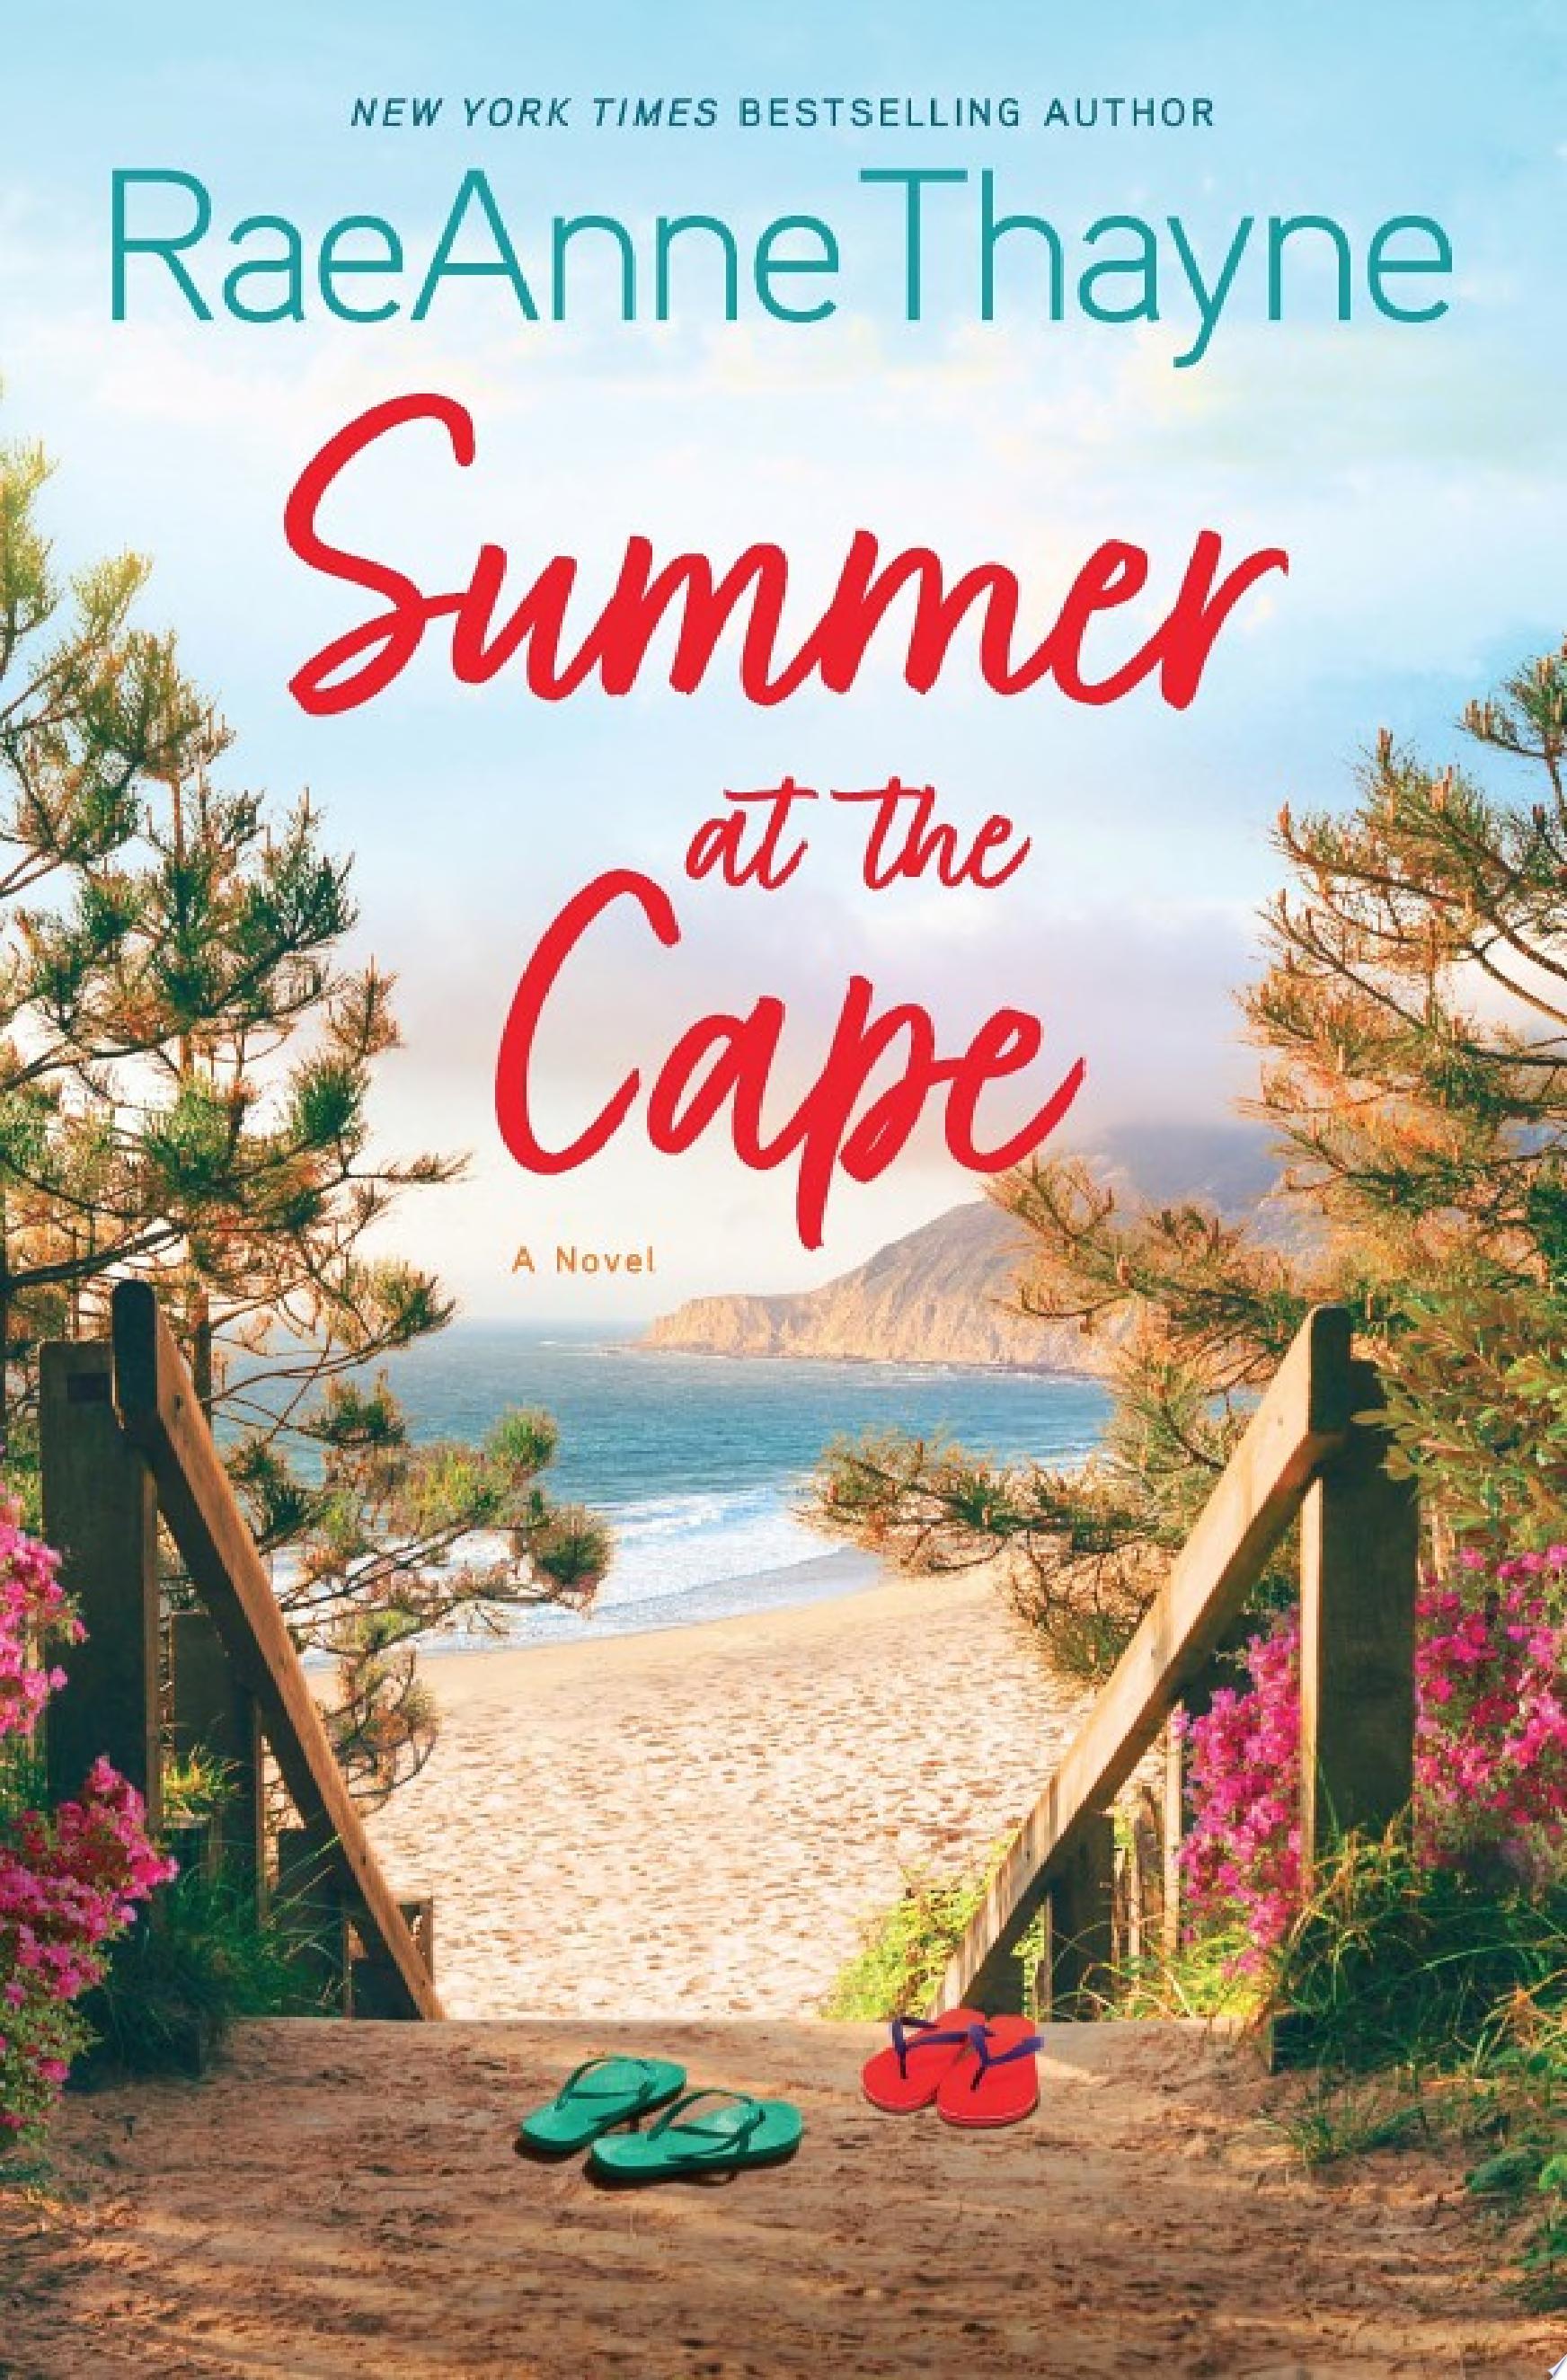 Image for "Summer at the Cape"